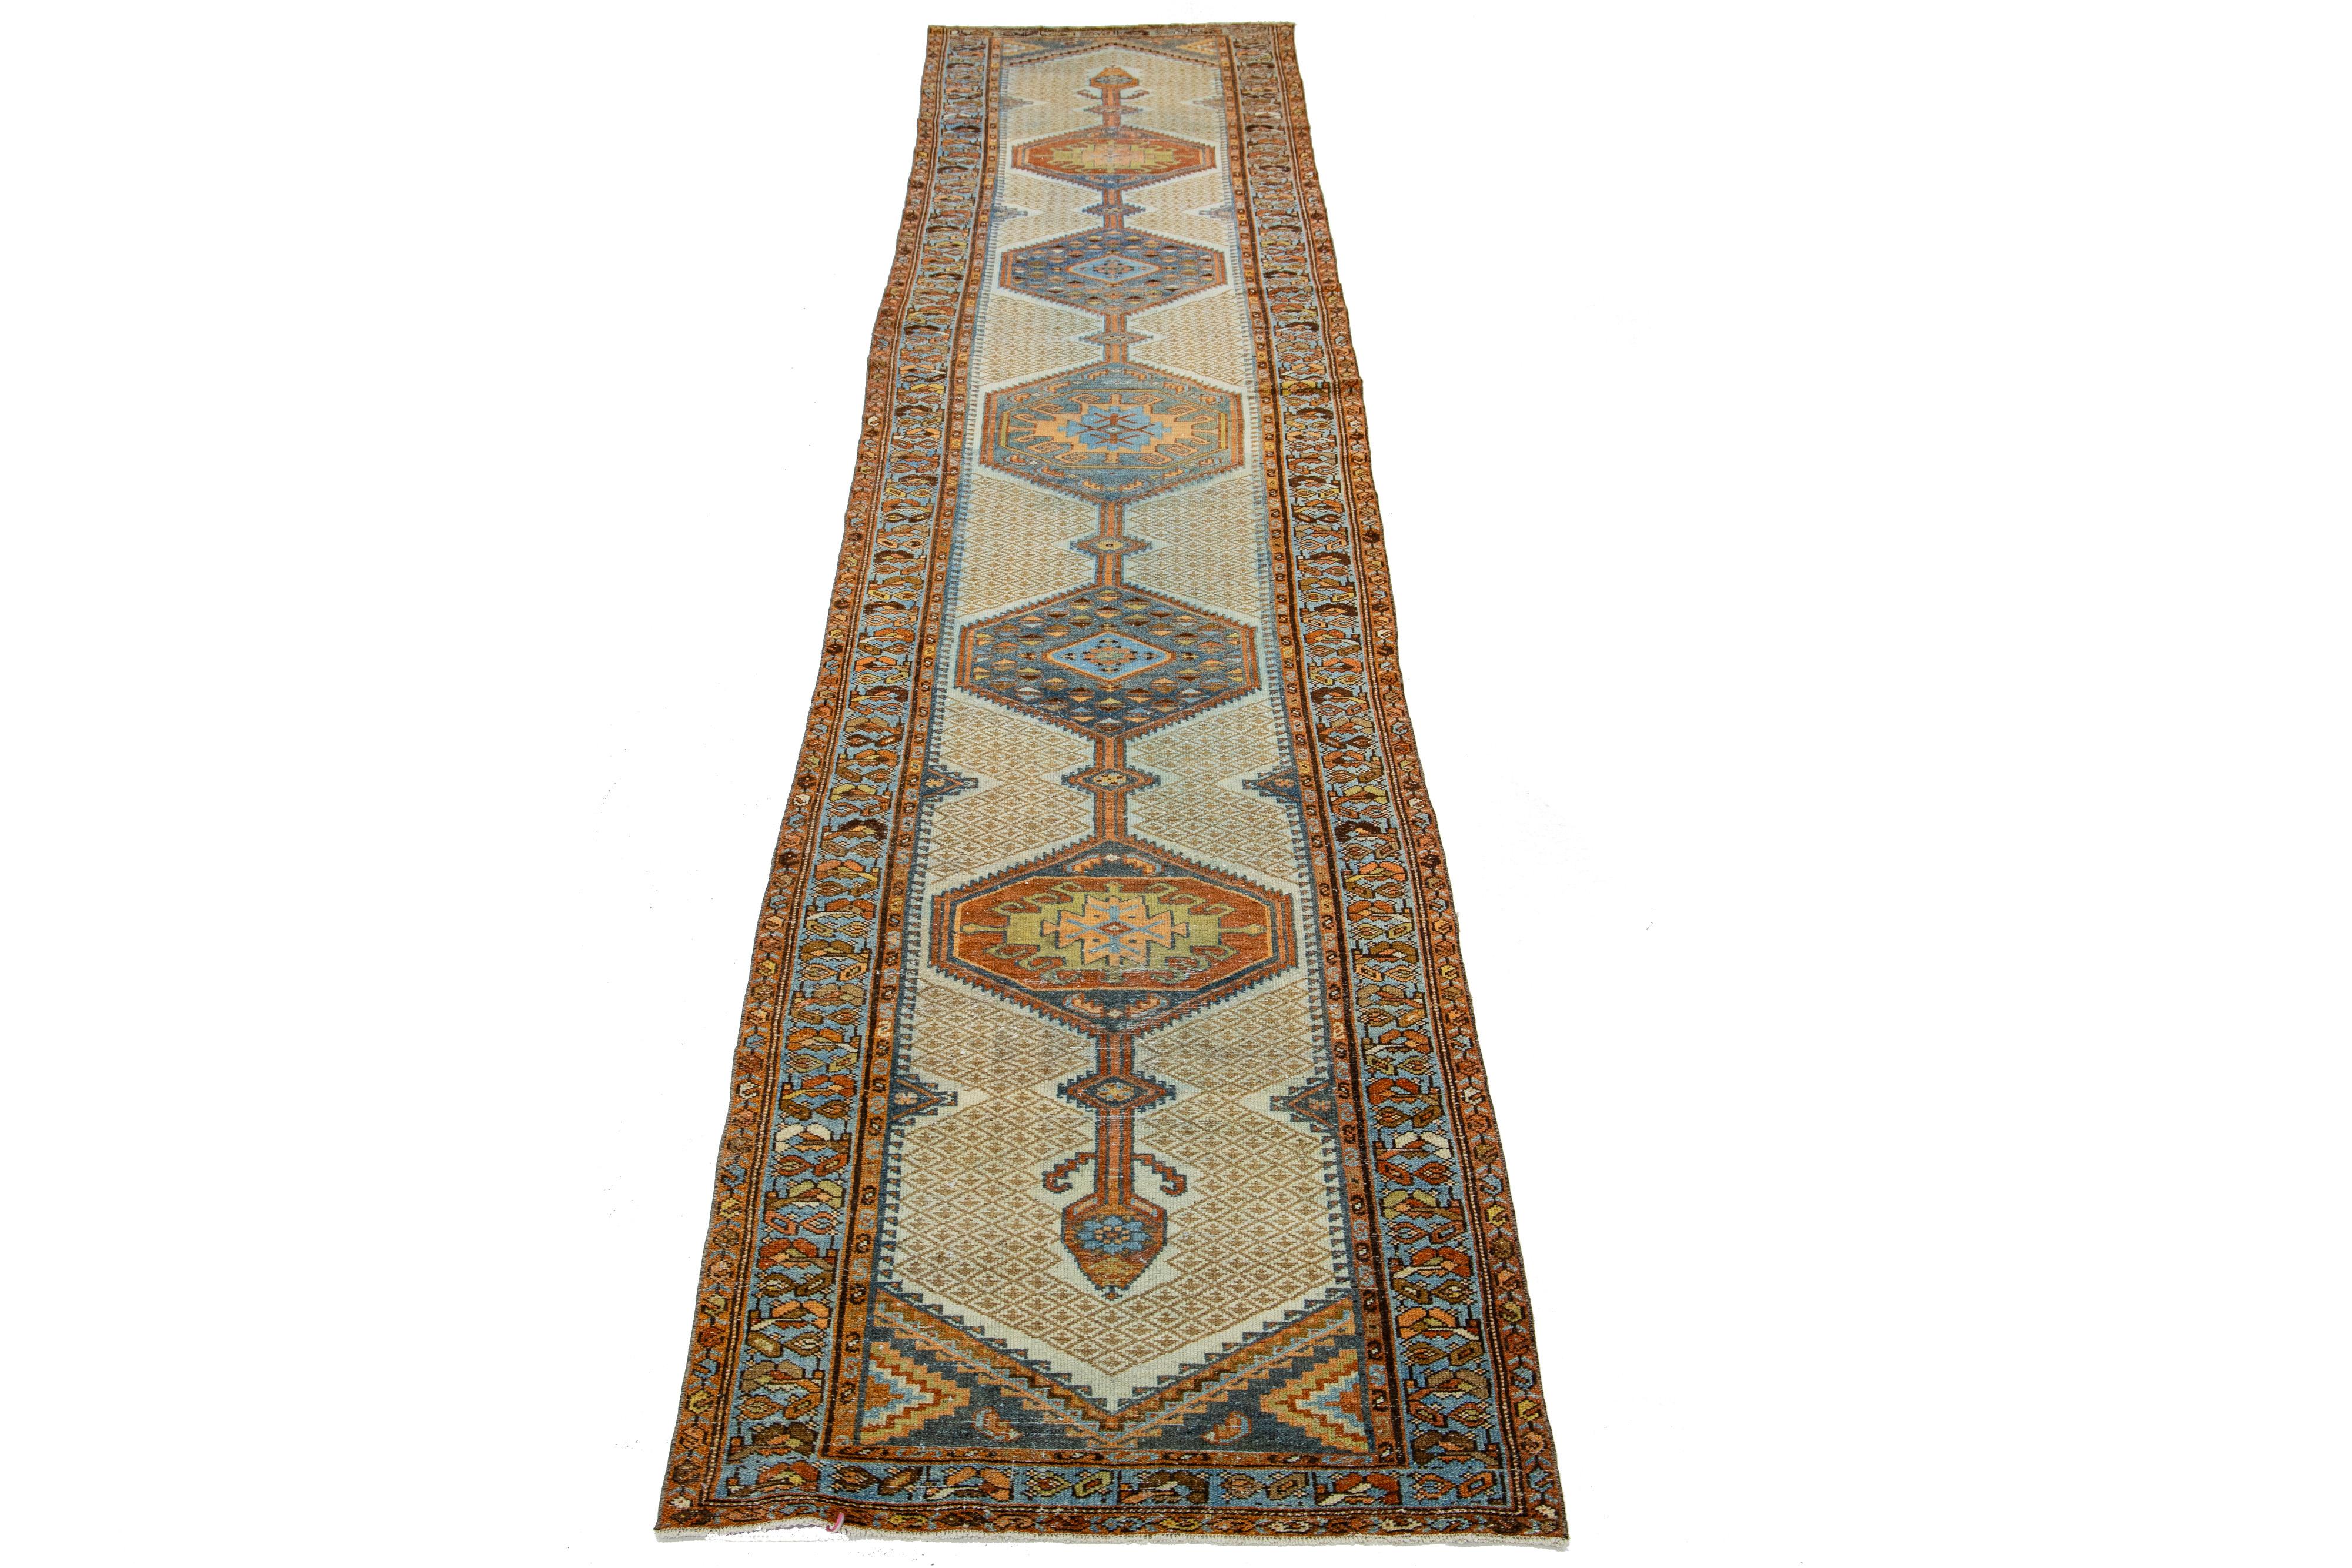 Beautiful antique Persian hand-knotted wool runner with a beige color field. This piece has rust and blue accents in a gorgeous multi-medallion design.

This rug measures 3'3